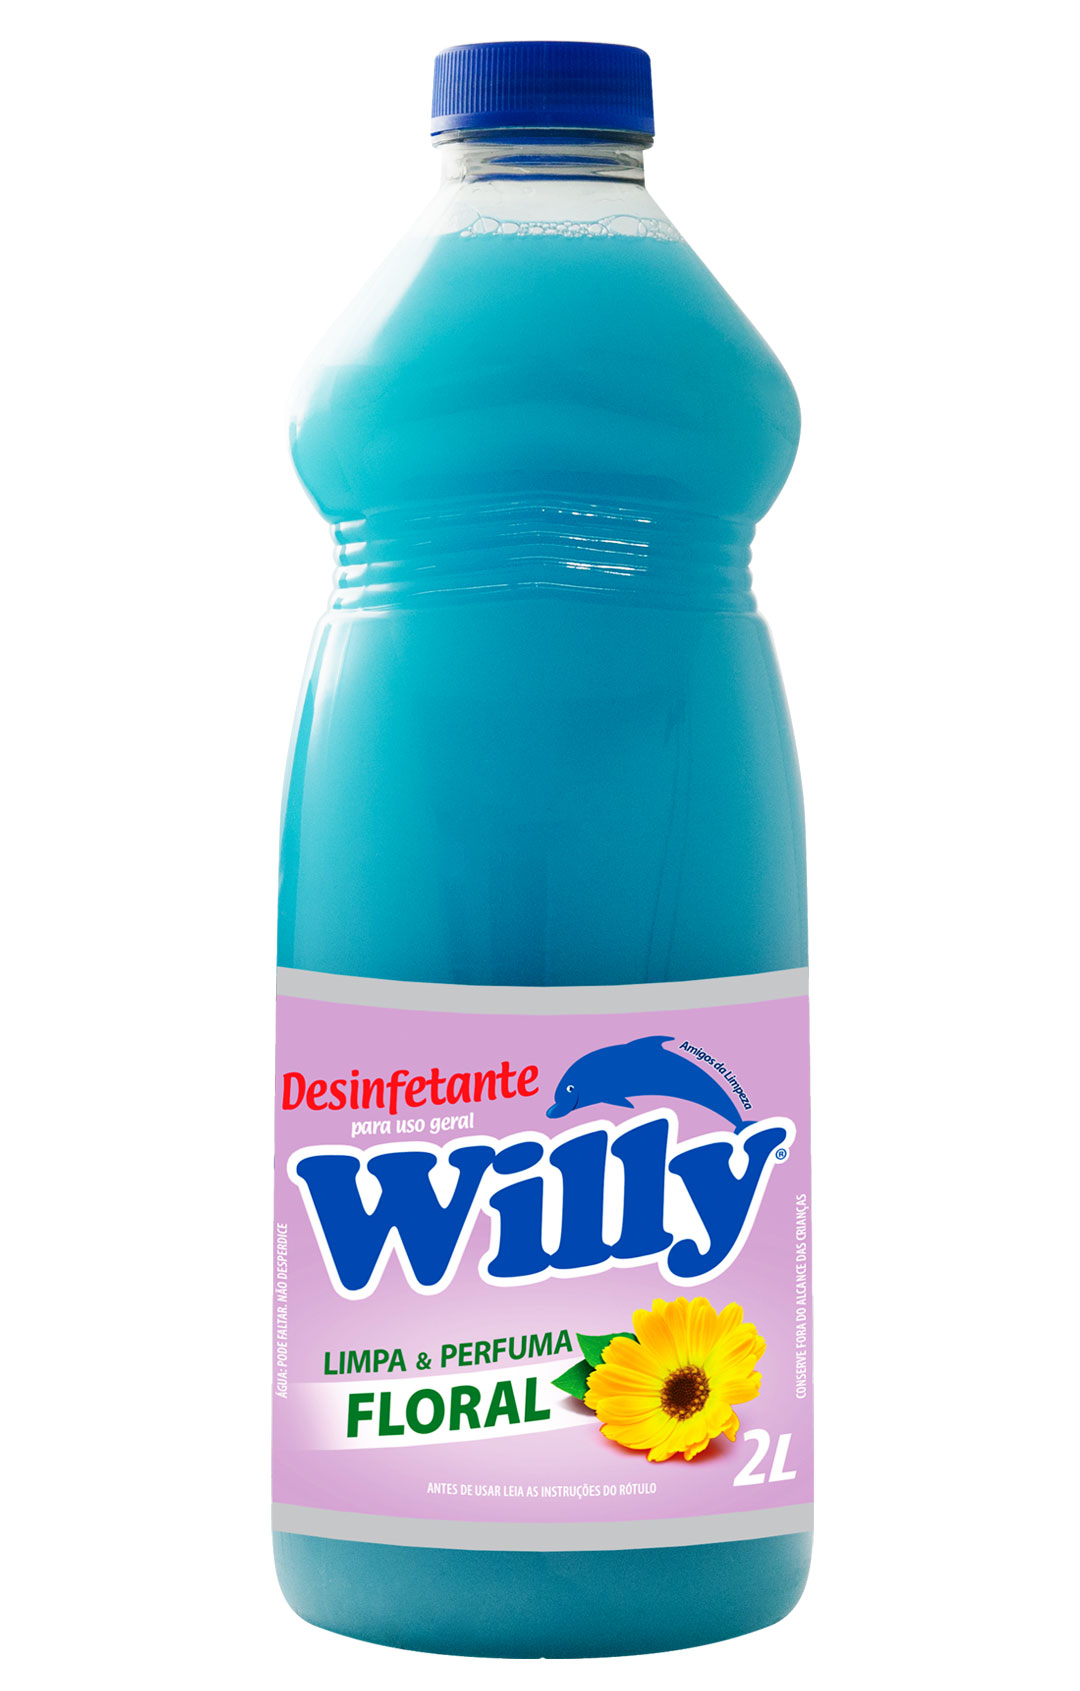 Desinfetante-Willy-Floral-2L